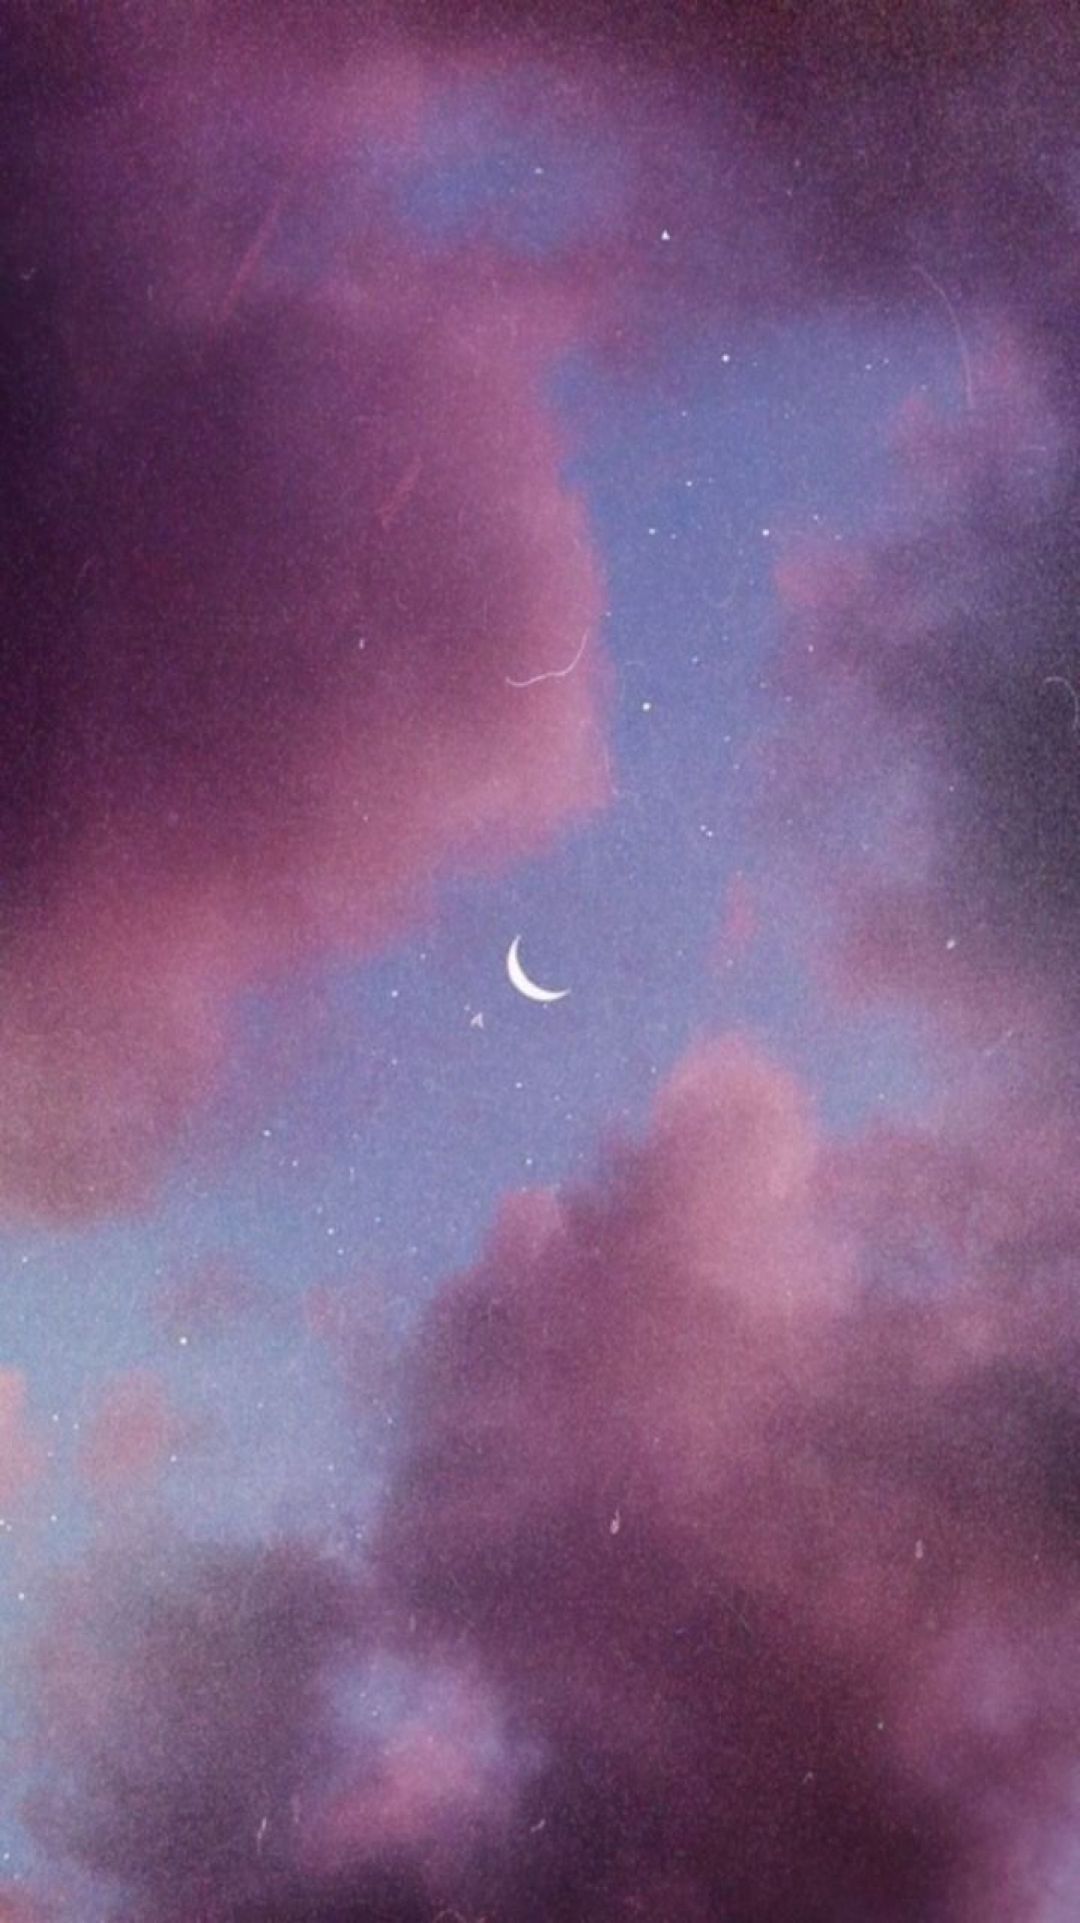 IPhone wallpaper with high-resolution 1080x1920 pixel. You can use this wallpaper for your iPhone 5, 6, 7, 8, X, XS, XR backgrounds, Mobile Screensaver, or iPad Lock Screen - Moon